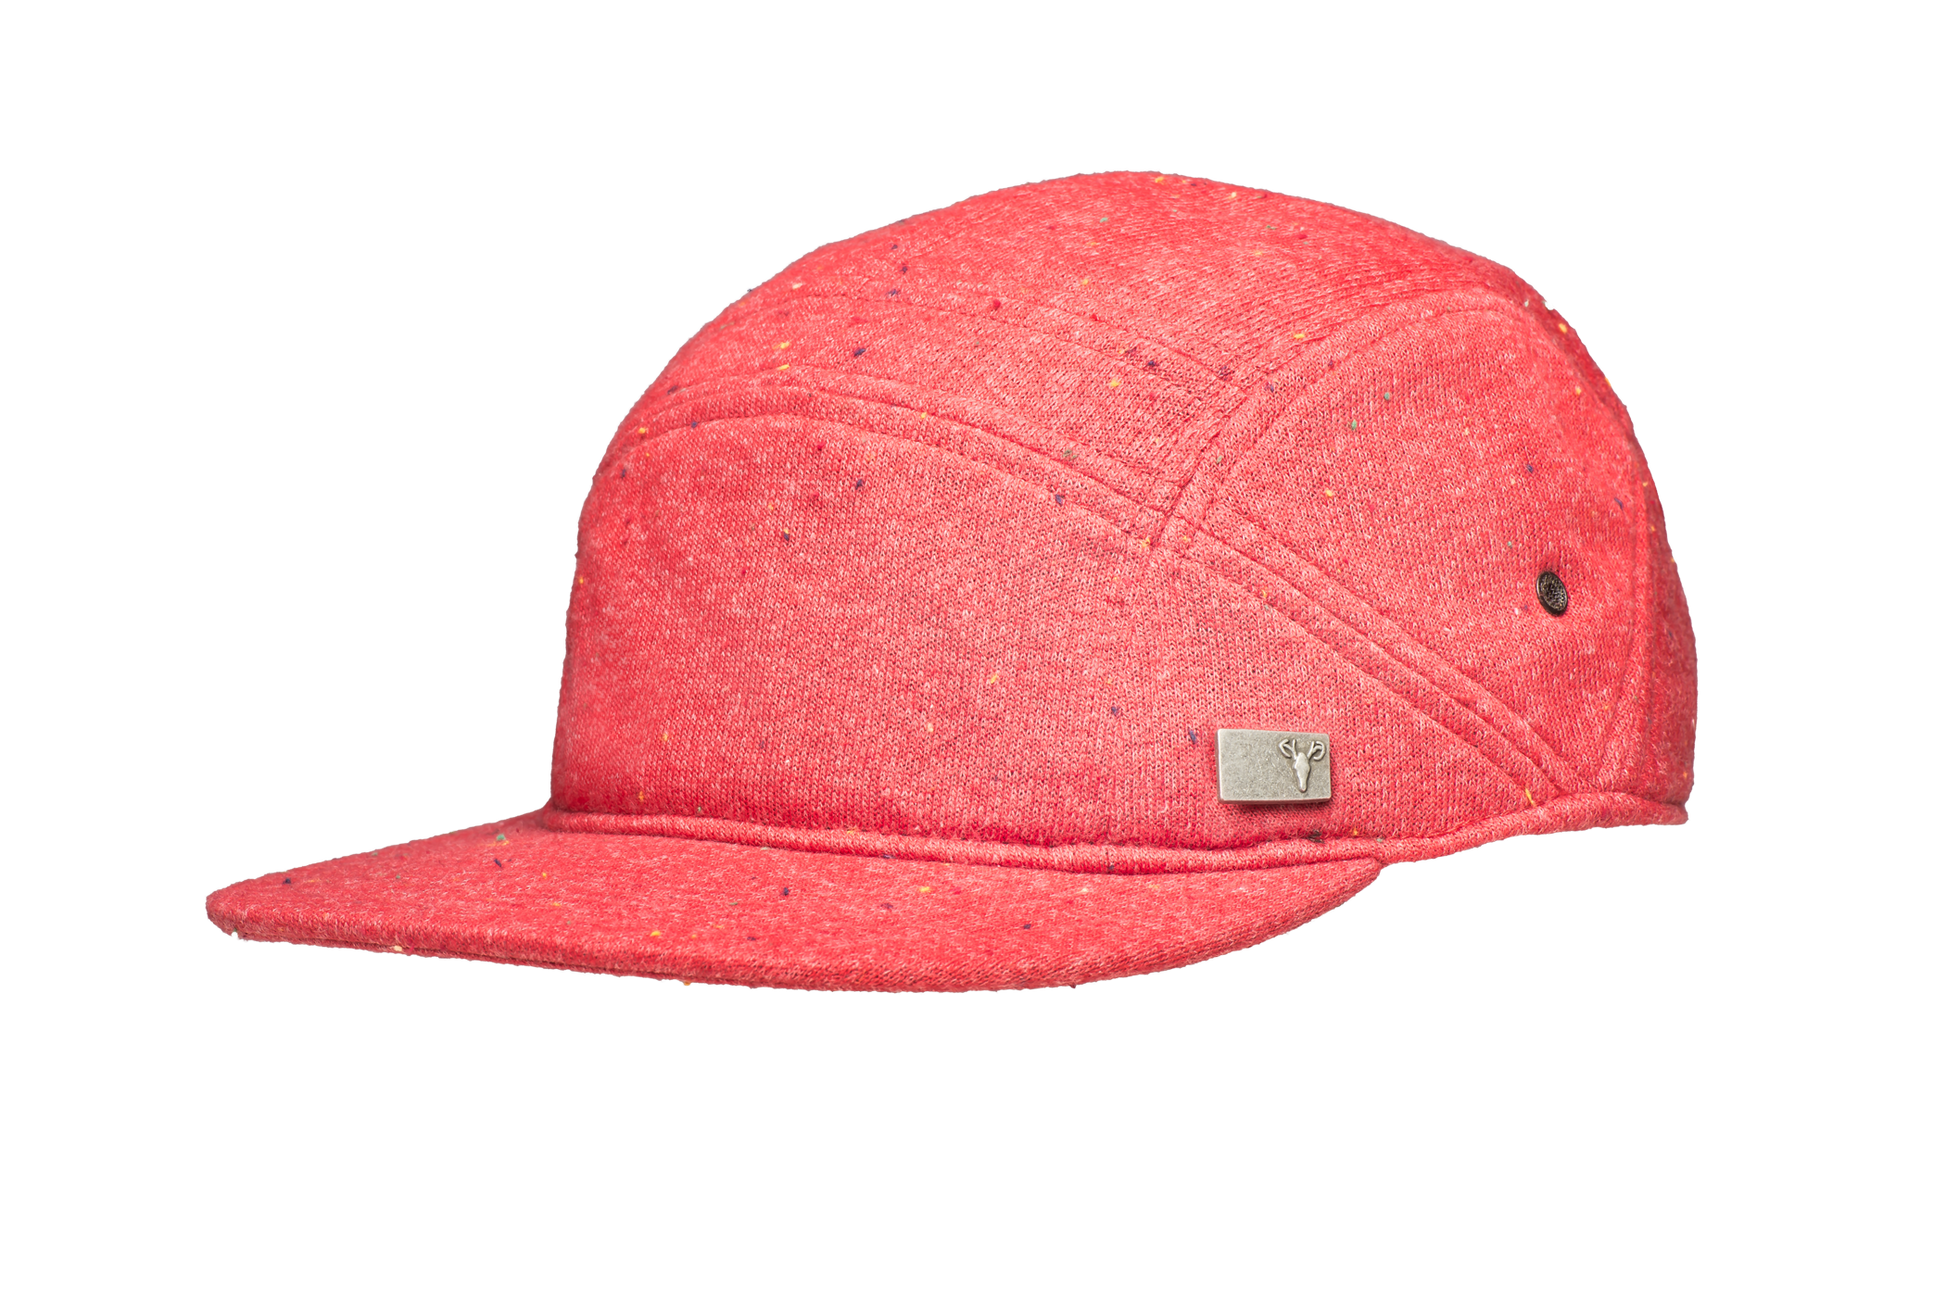 Unisex camp hat with metal plate branding on crown side in H. Red